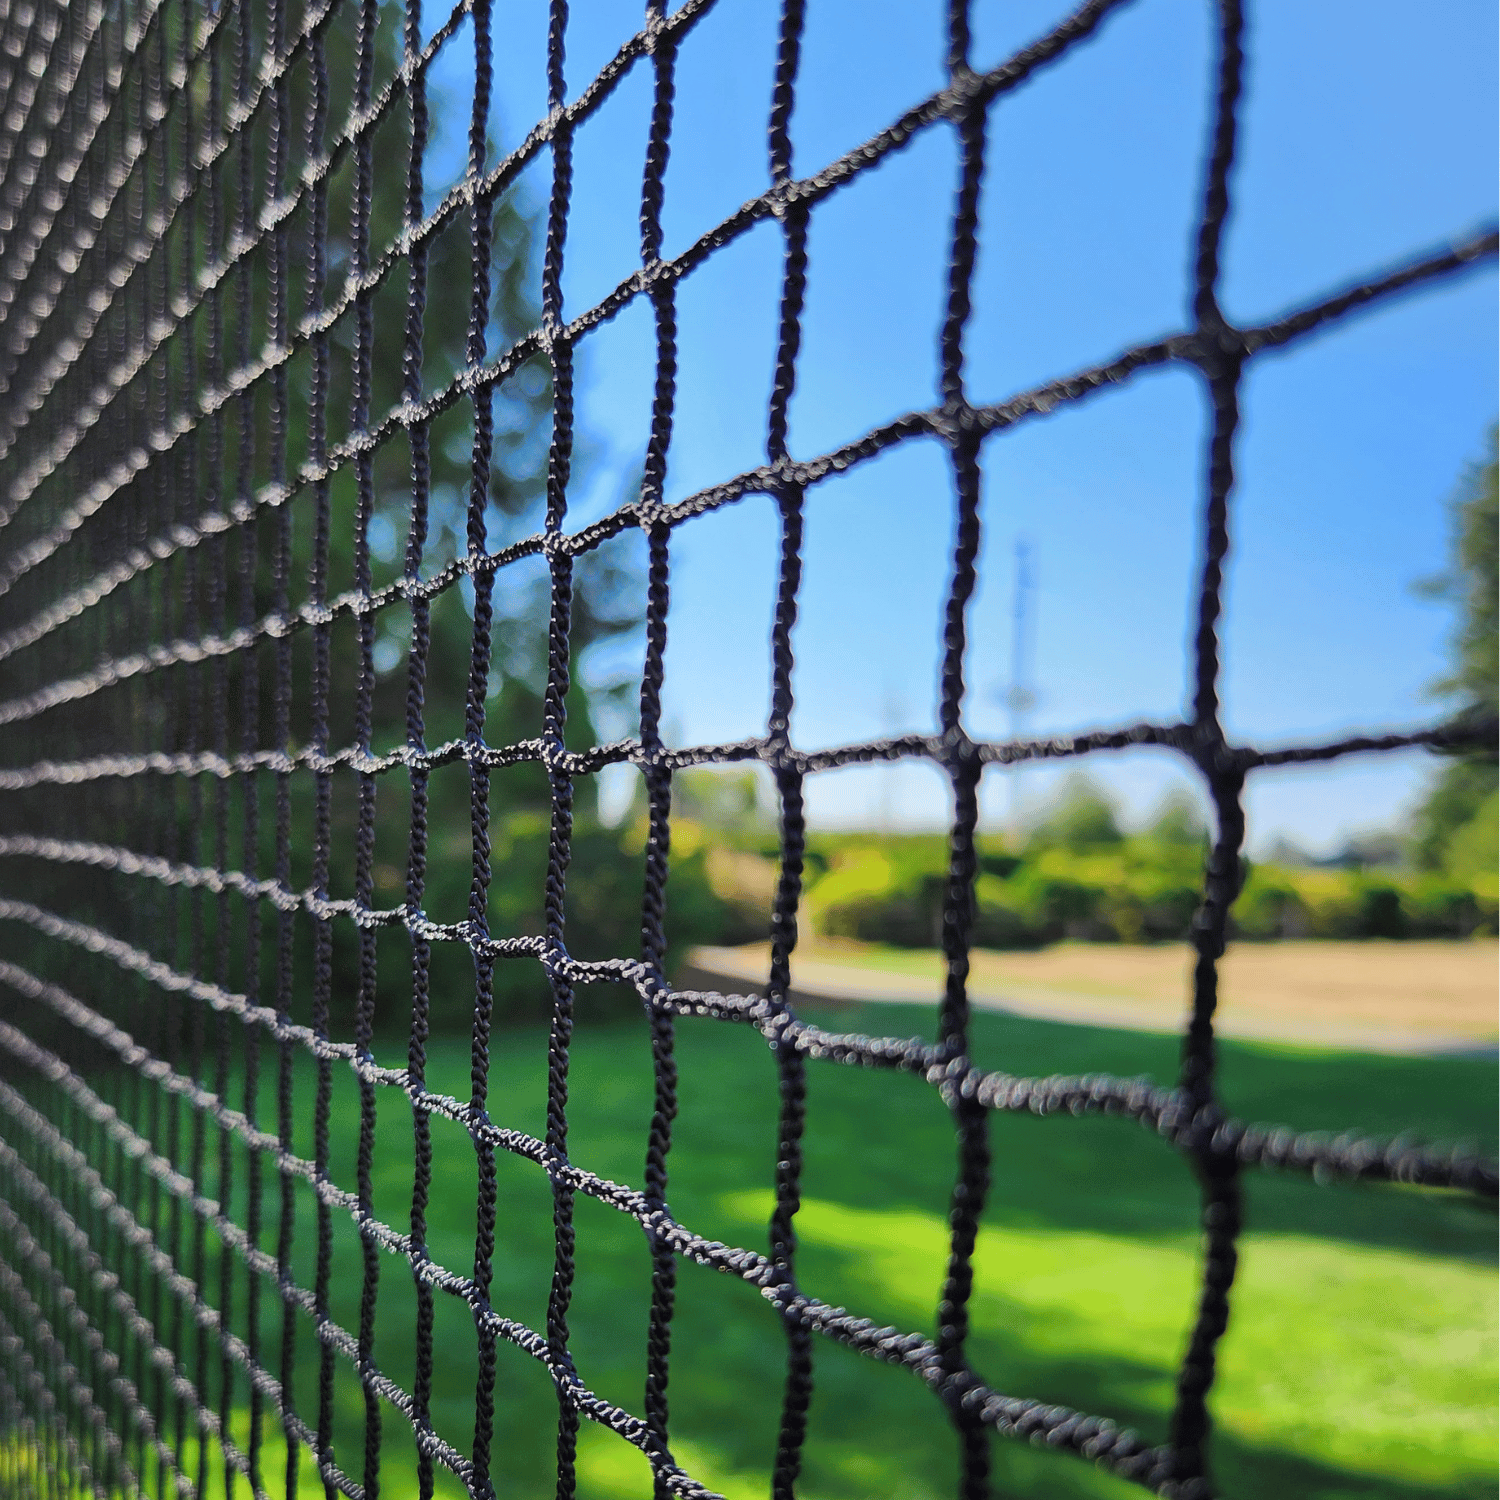 Close up picture of Golf netting on course